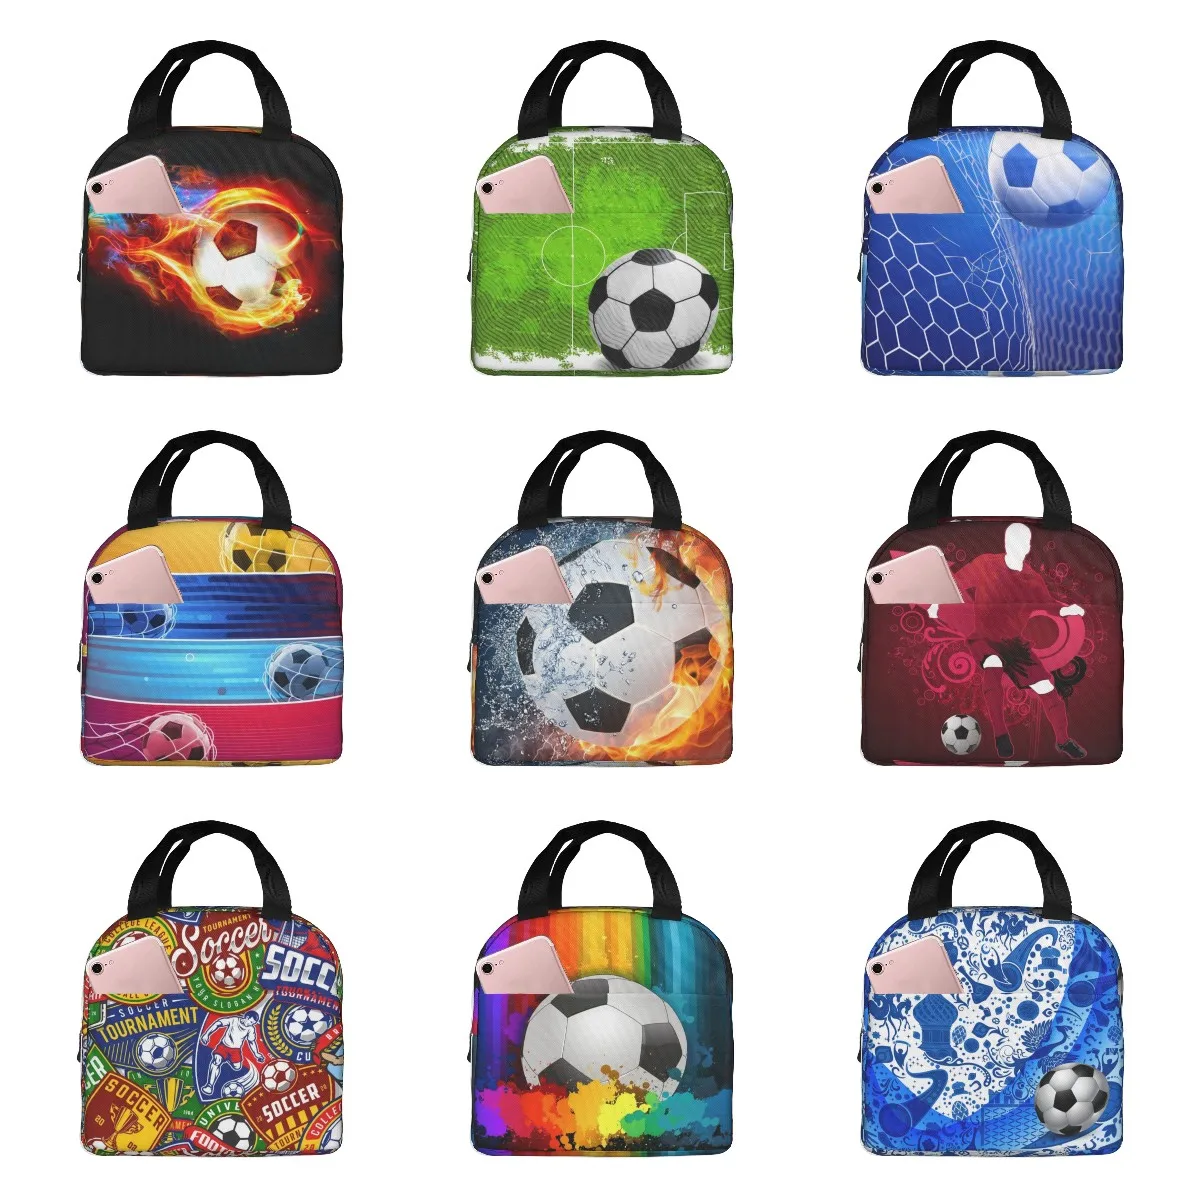 Soccer Soccer Ball Flames Thermal Insulated Lunch Bag Men Football Sport Portable Lunch Tote for School Travel Storage Food Box